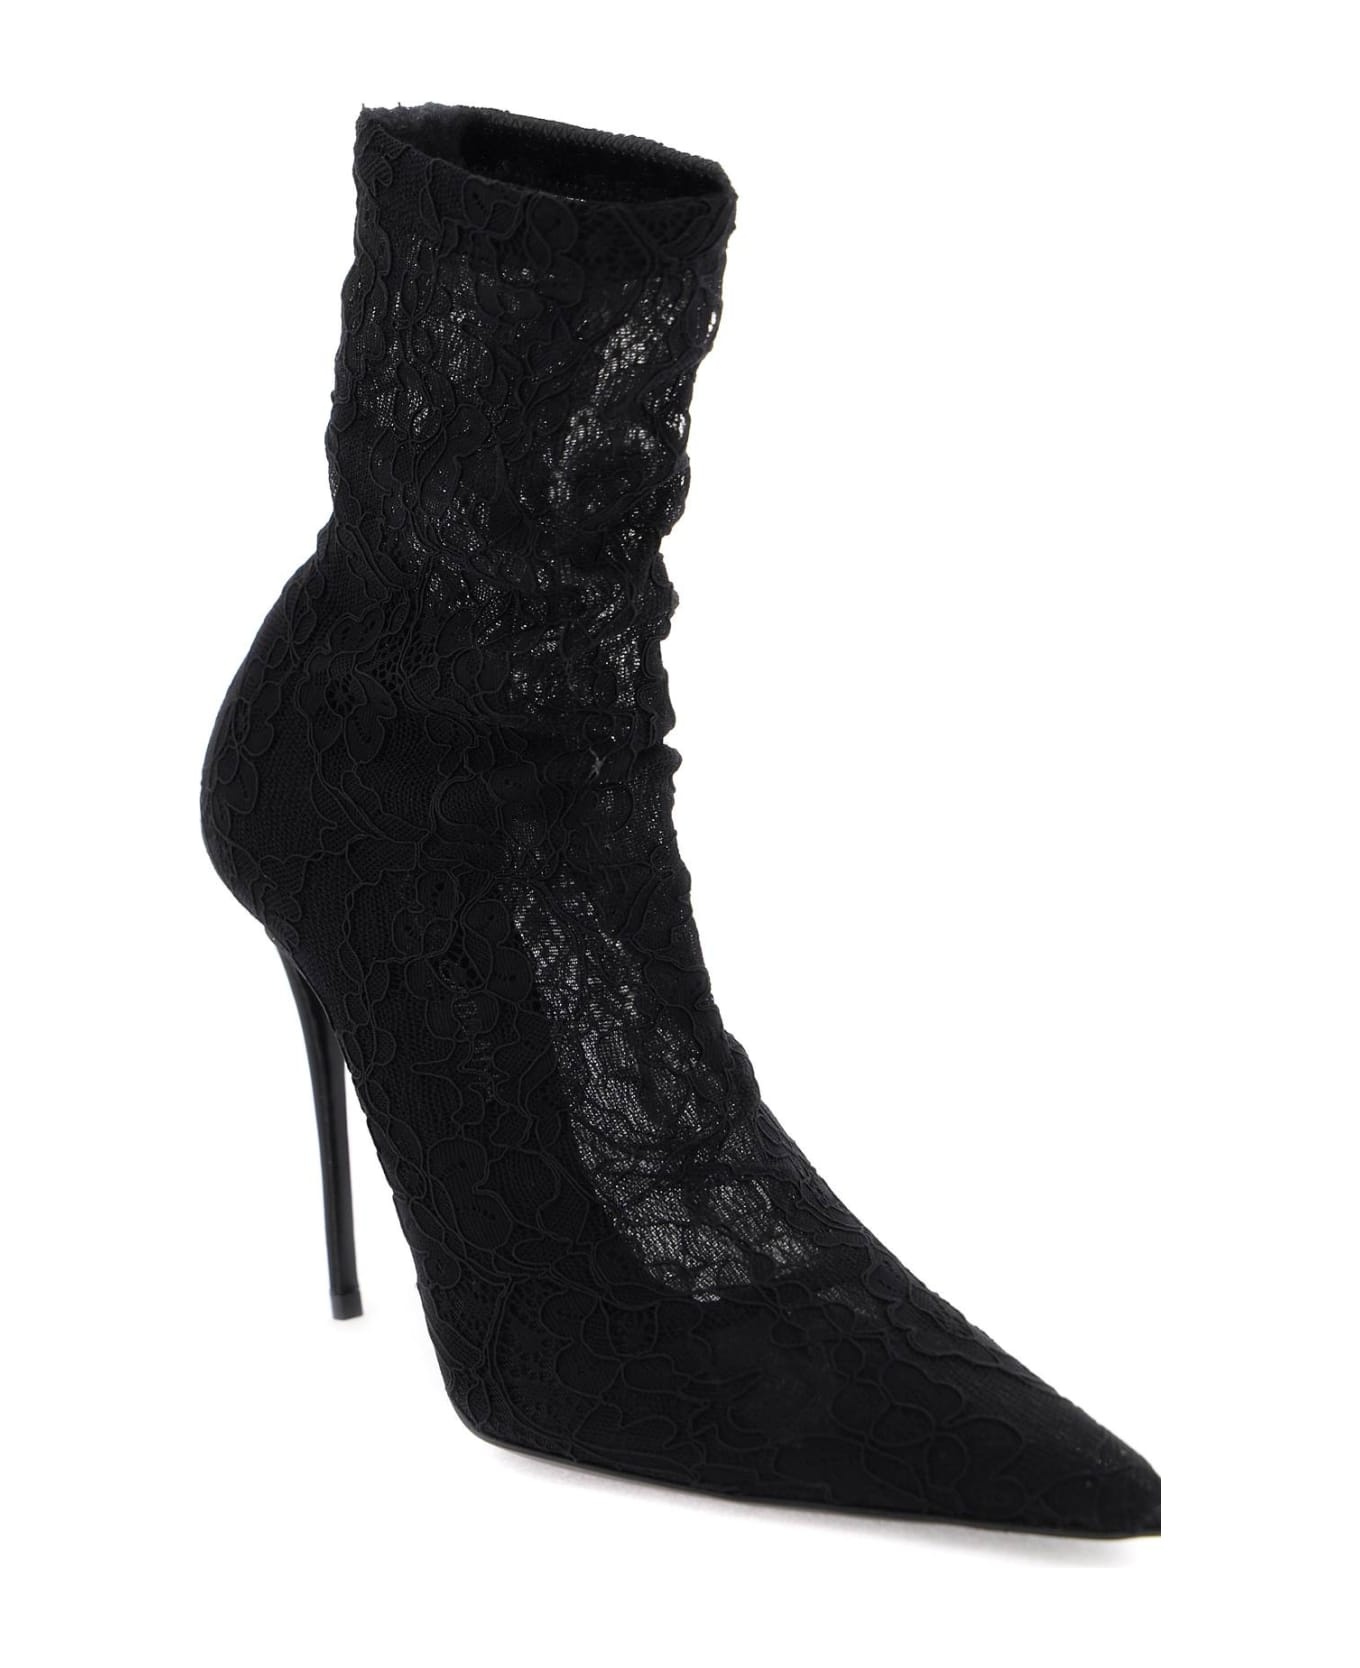 Lace Ankle Boots - 4